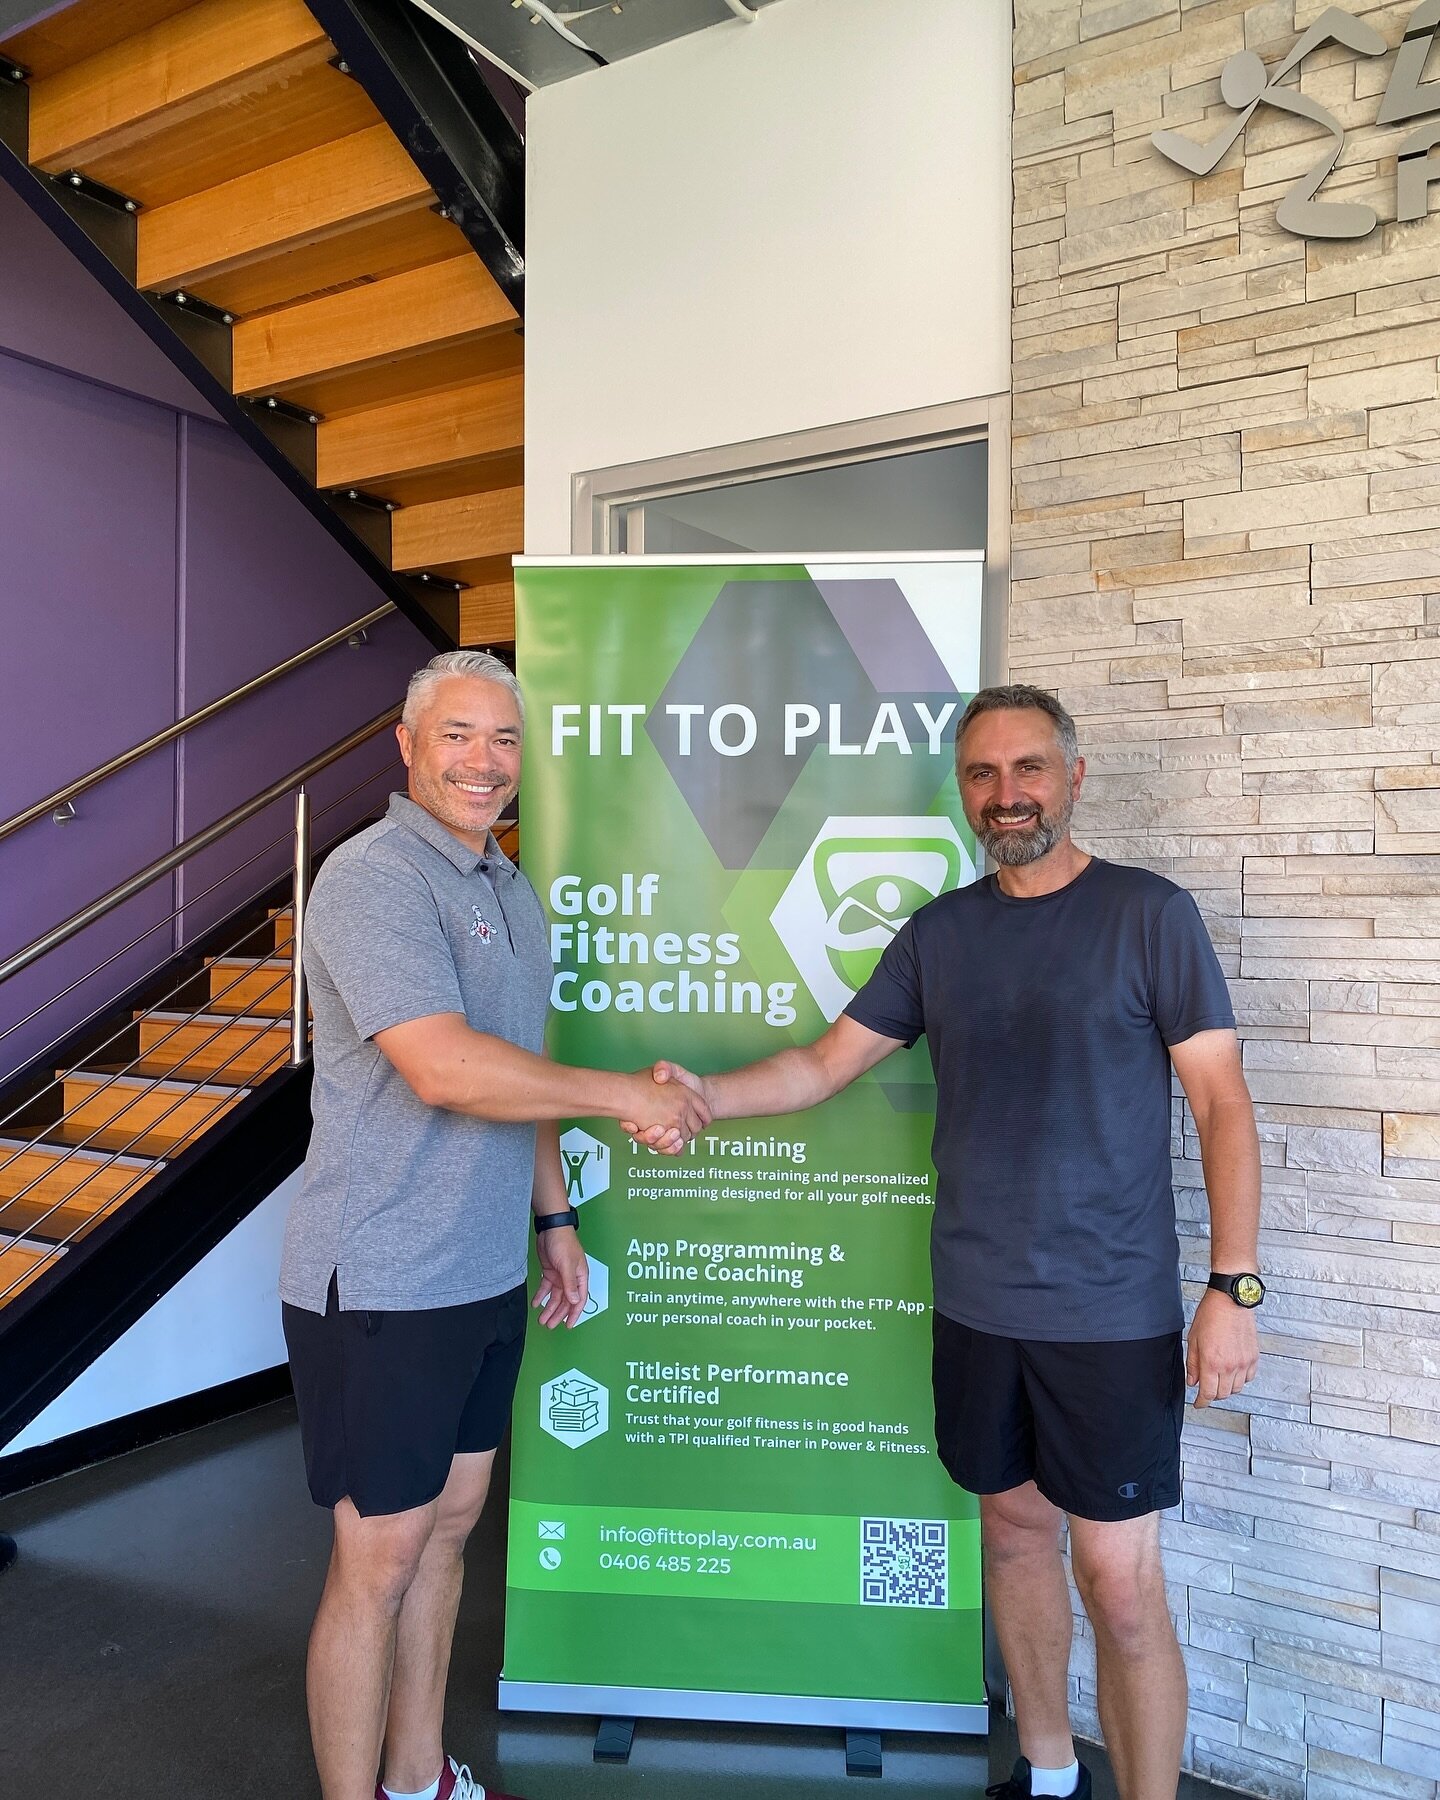 🏌️⛳ Excited to announce the newest addition to our golf fitness coaching team at FTP! 

🌟 Welcome aboard, @wenhammathew! 

As a pennant player for @mtderrimutgc, Mat came to us seeking solutions for some persistent challenges hindering his game. Wi